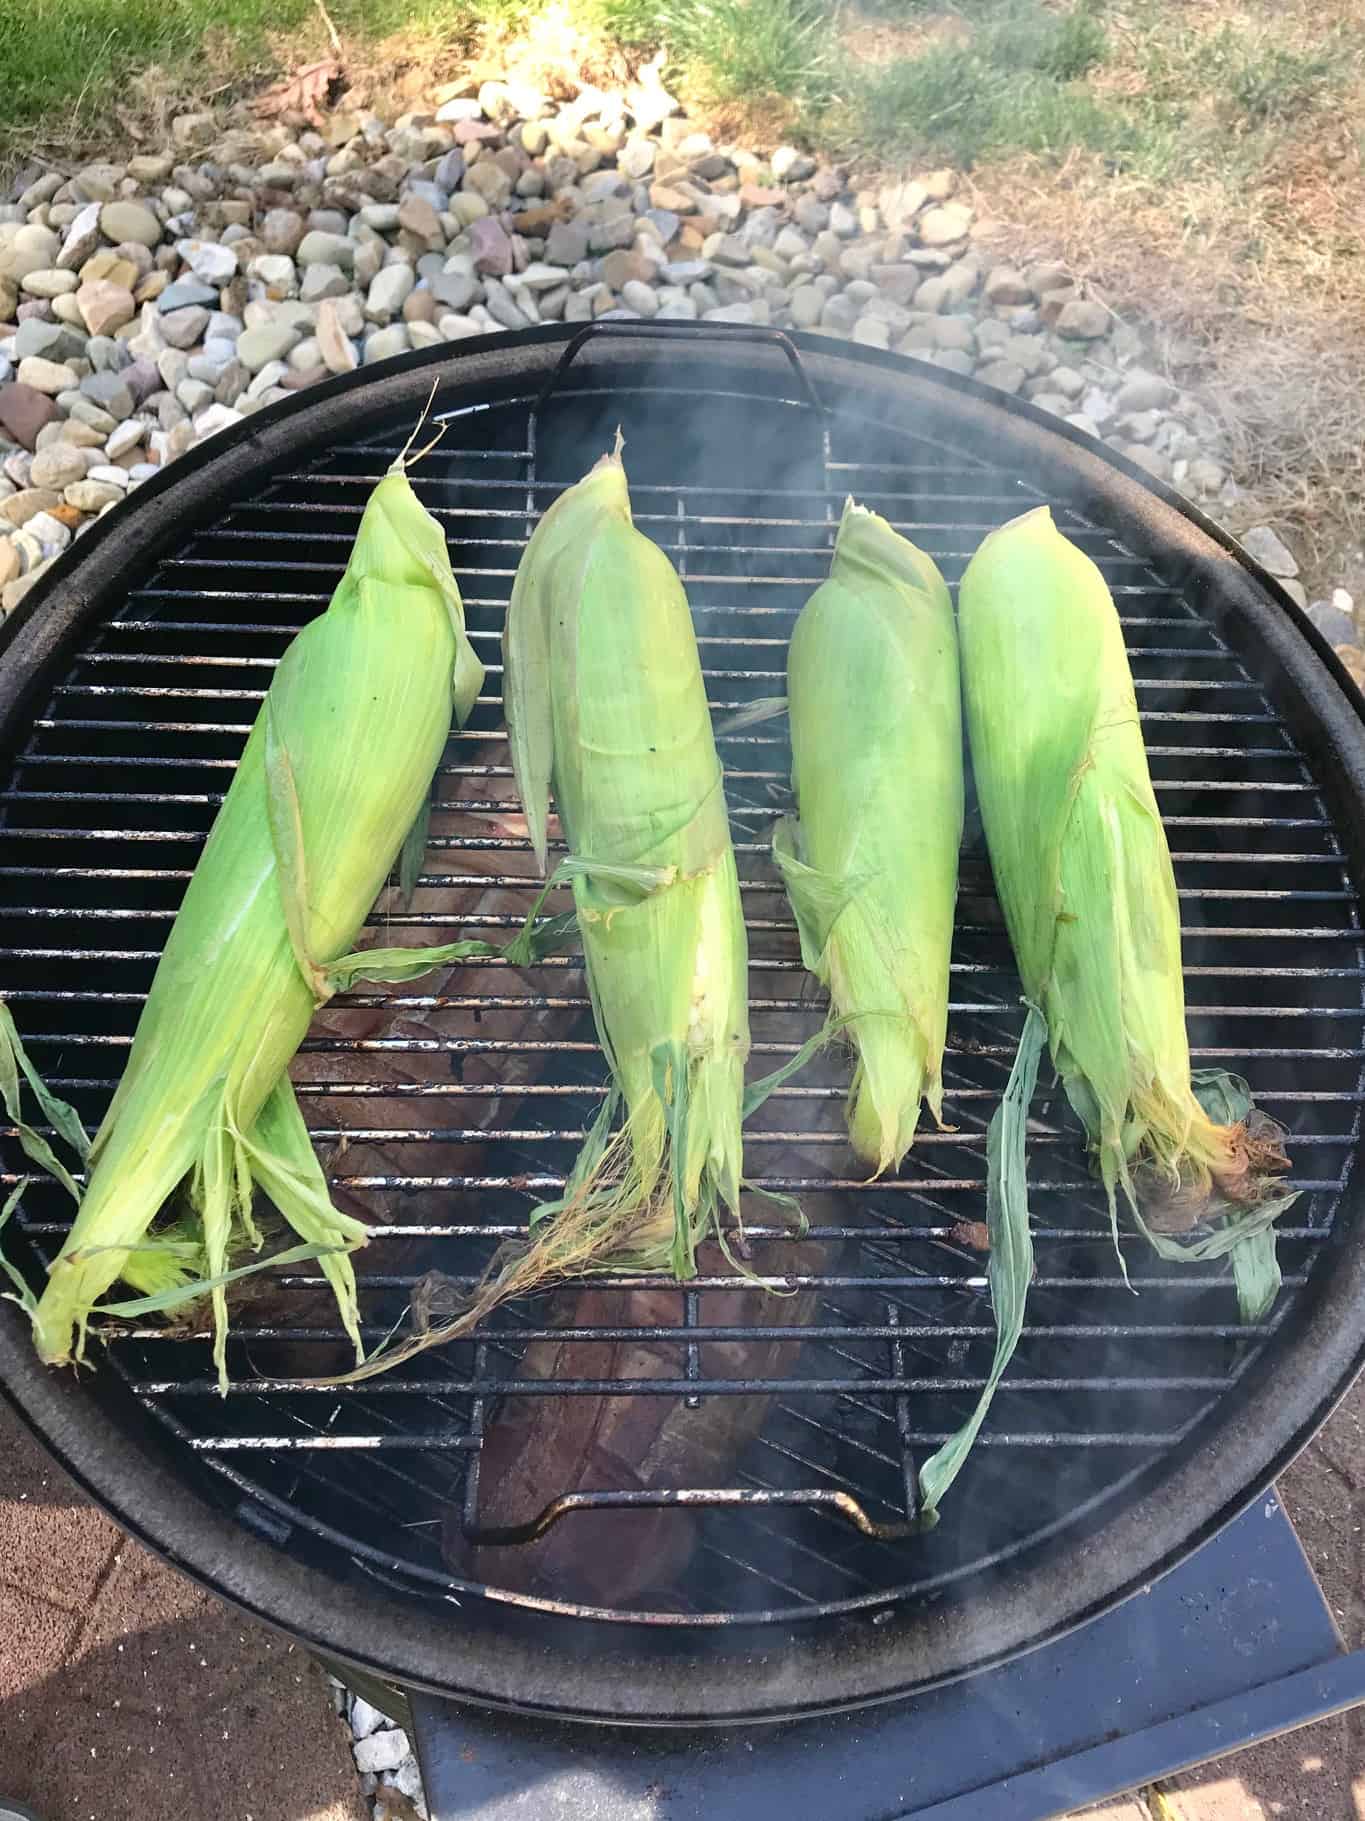 Corn on the cob in husks on weber grill 